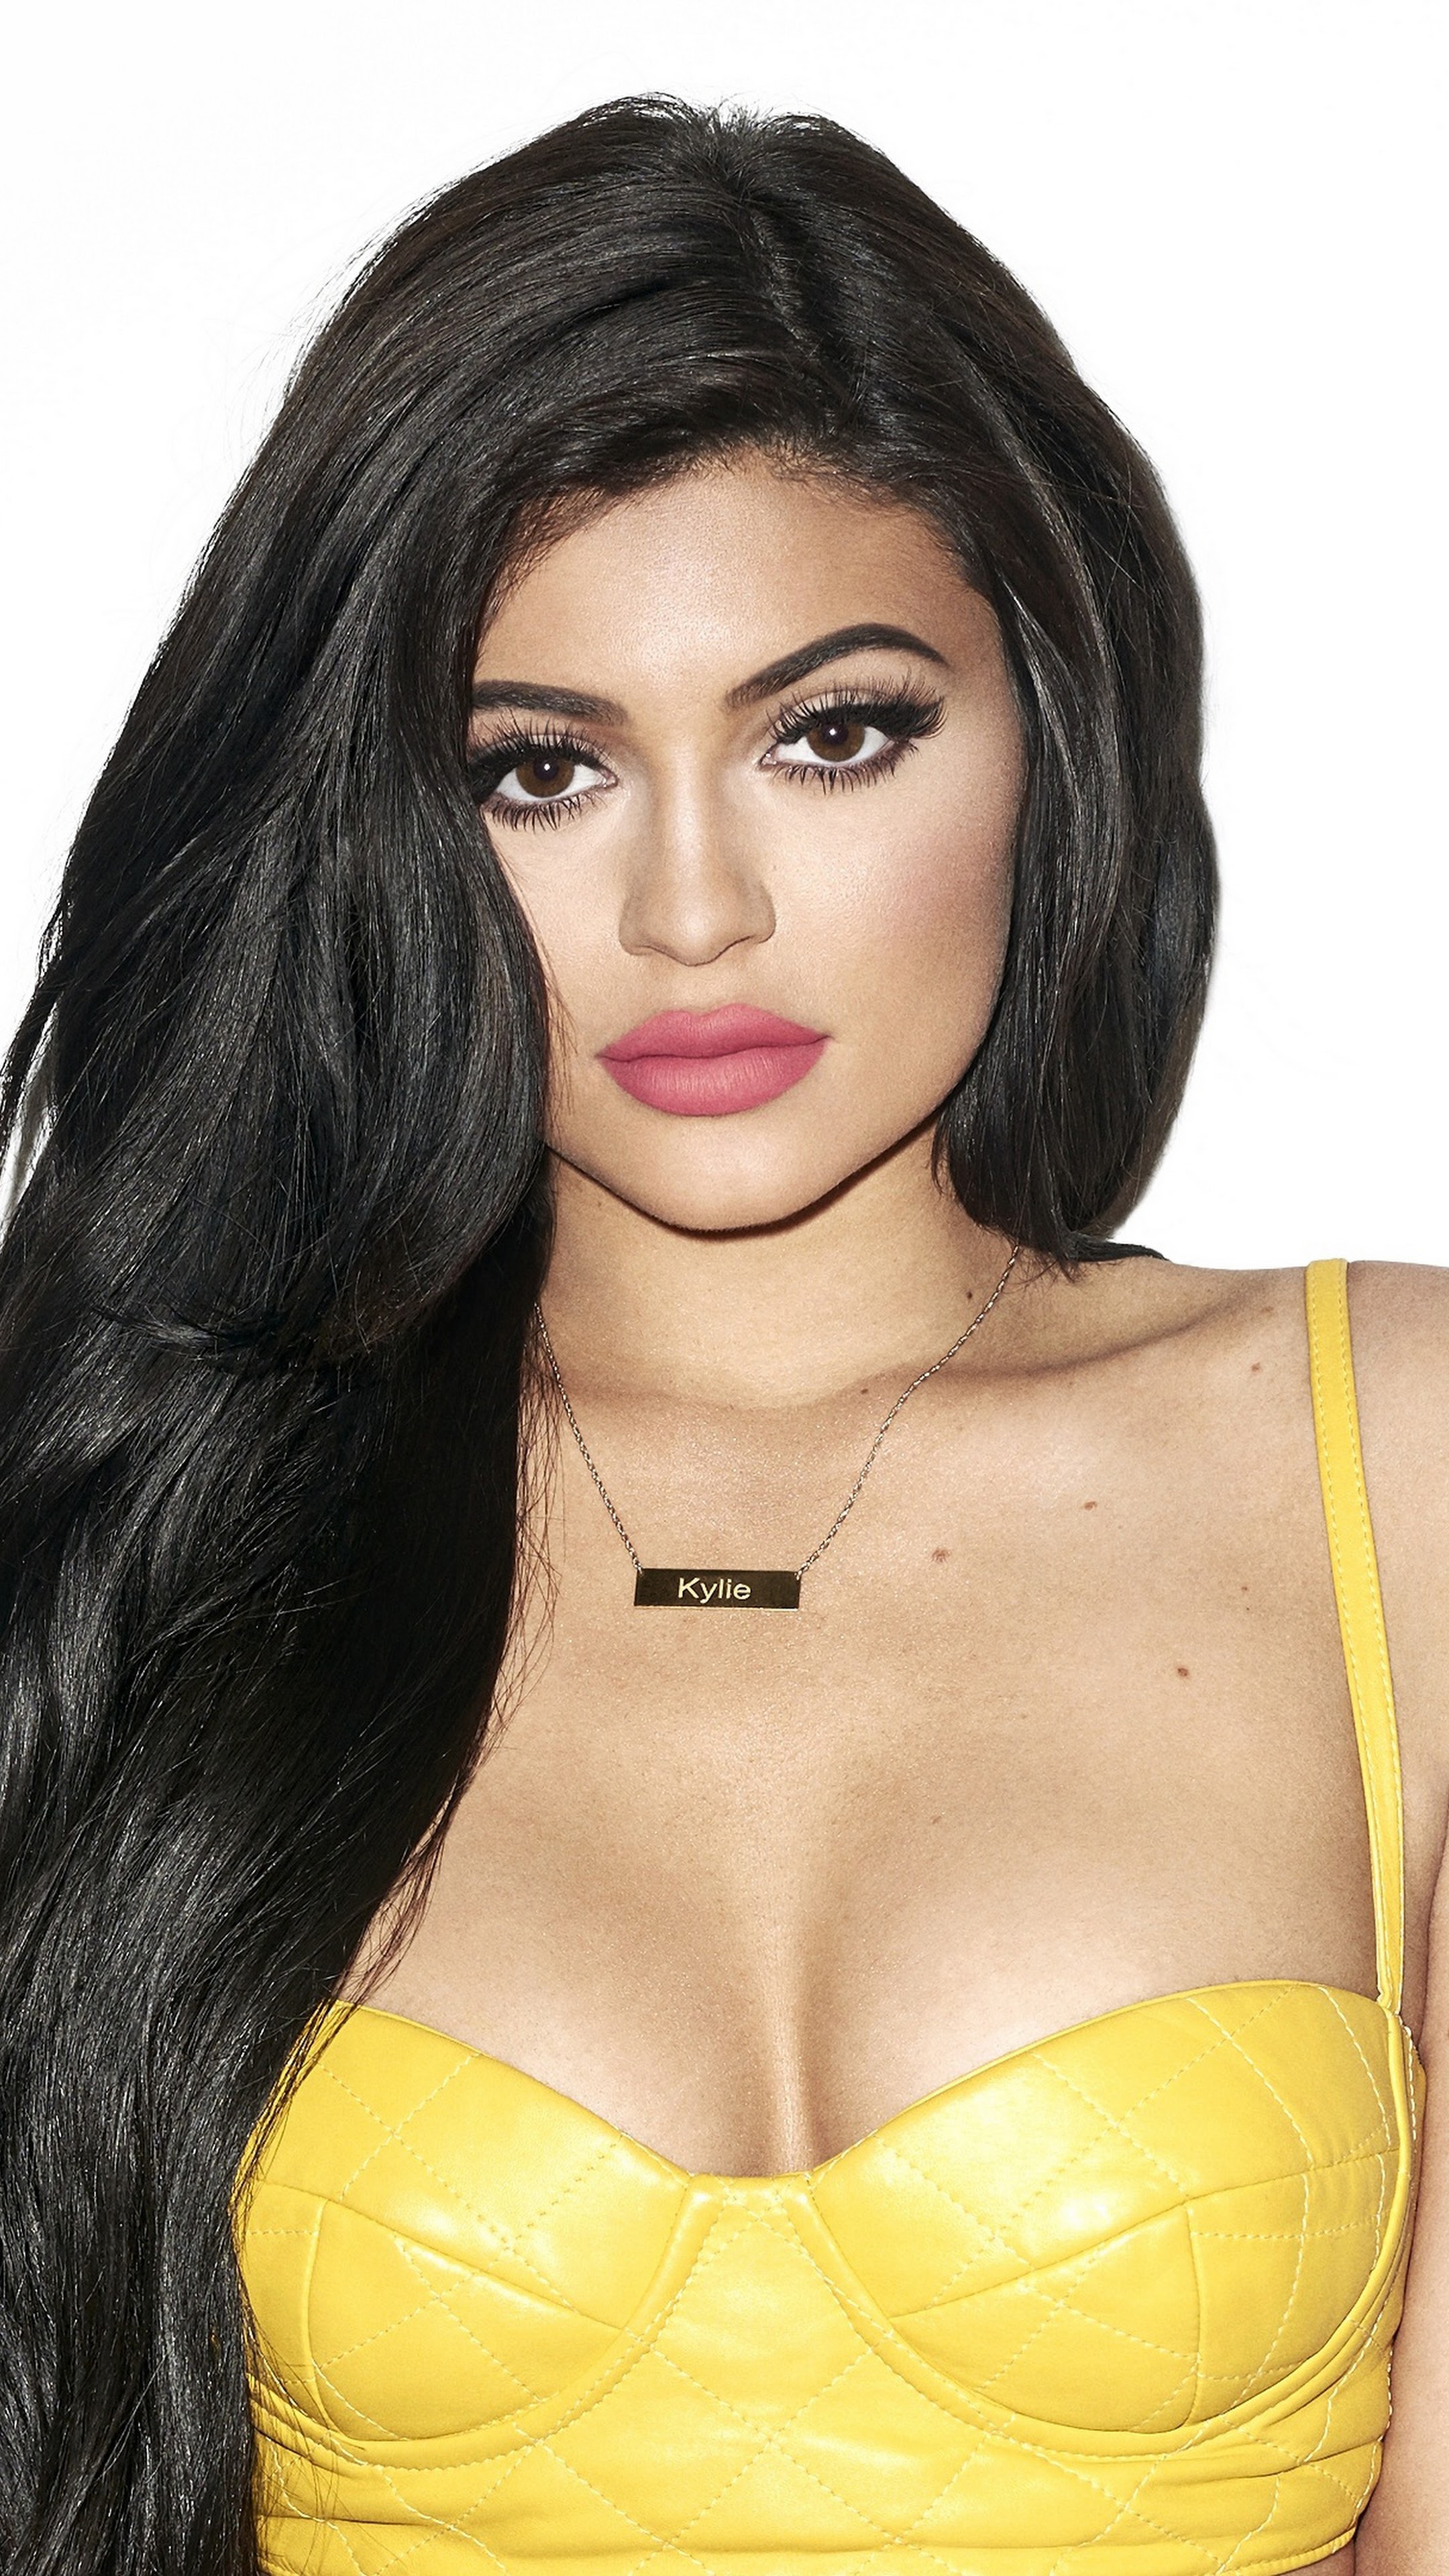 The Best and Most Comprehensive Kylie Jenner Wallpaper Hd